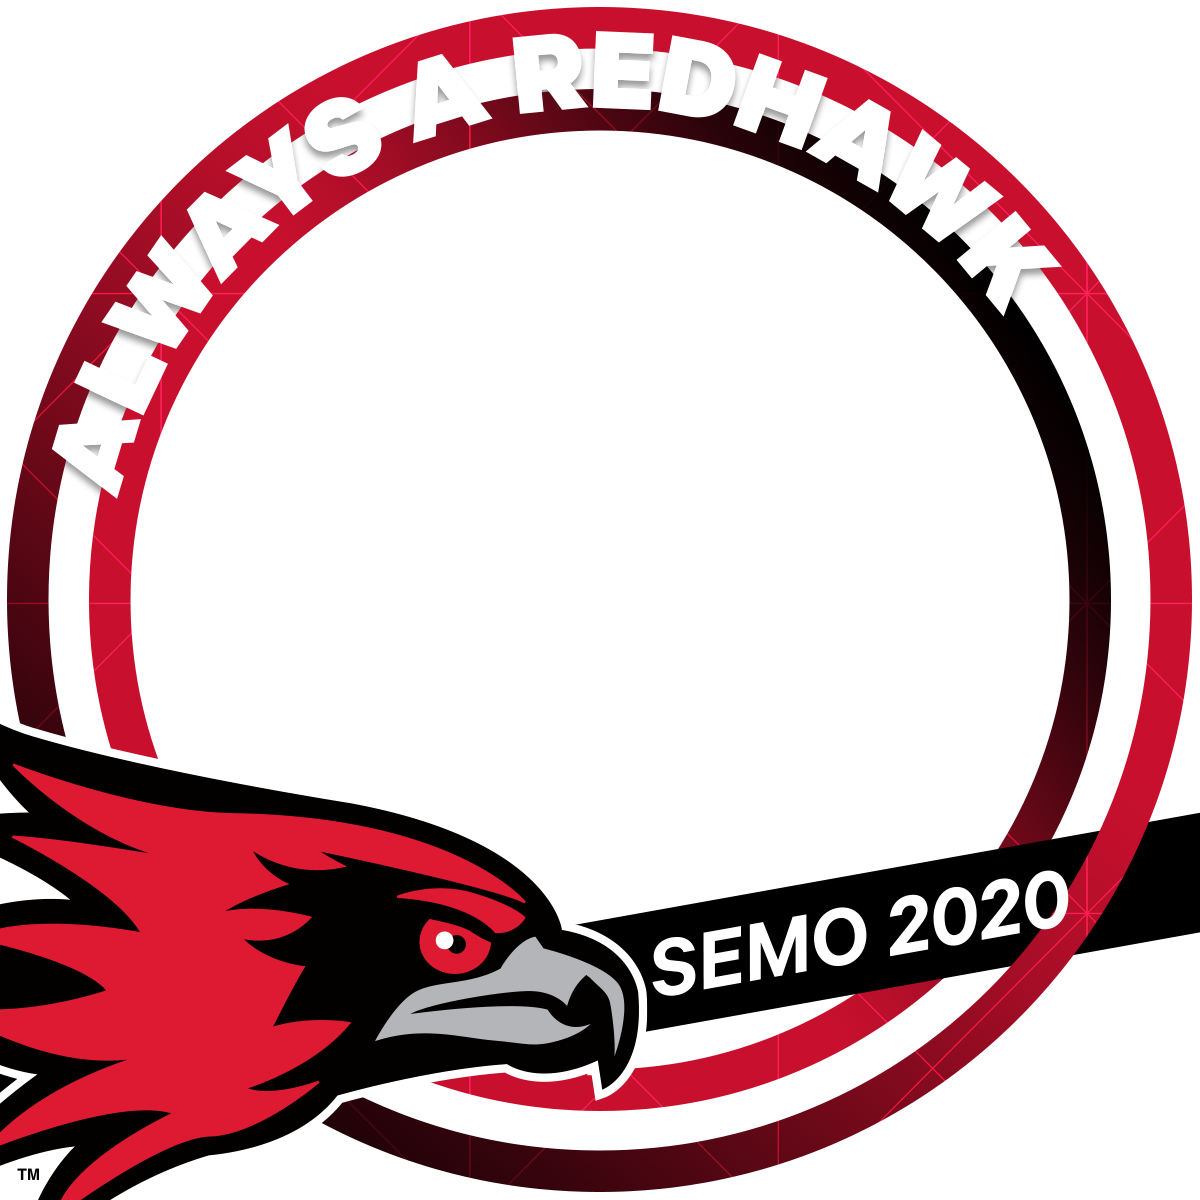 "Always a Redhawk" circular frame with the redhawk logo in the bottom left corner and "SEMO 2020" in the bottom right.